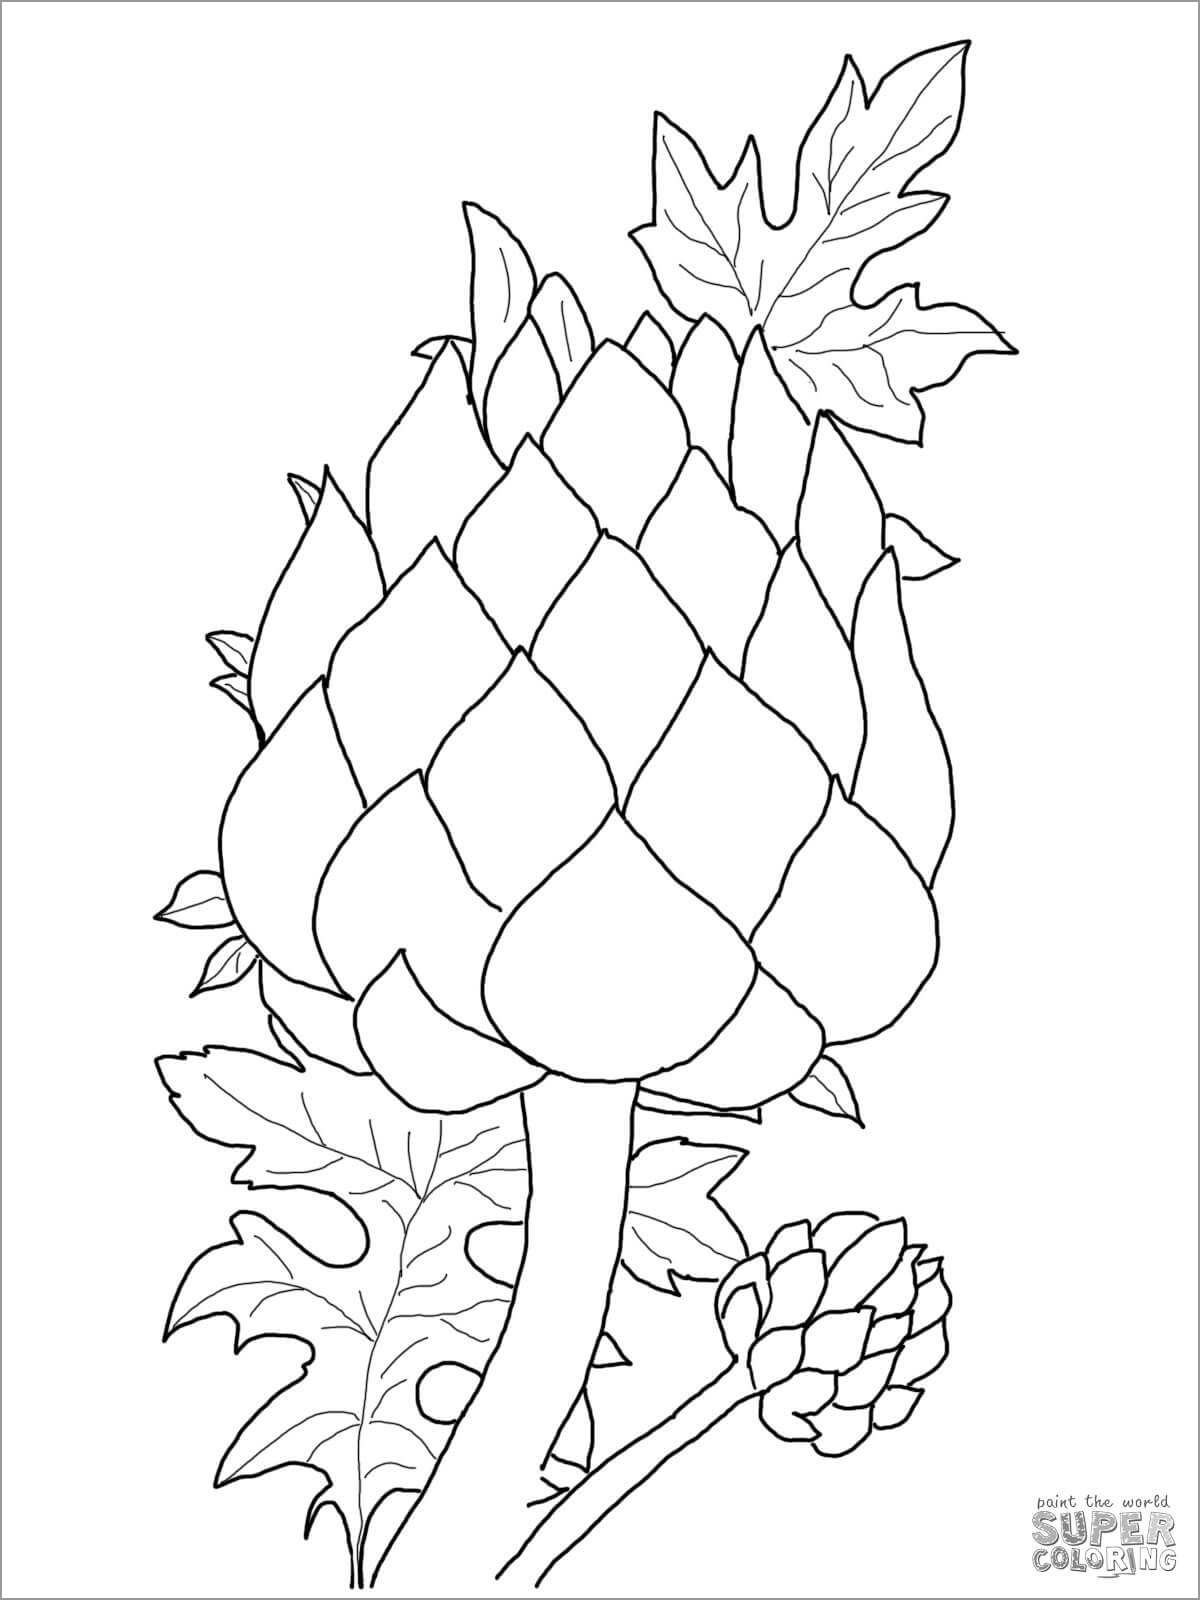 Artichoke Coloring Page for Kids